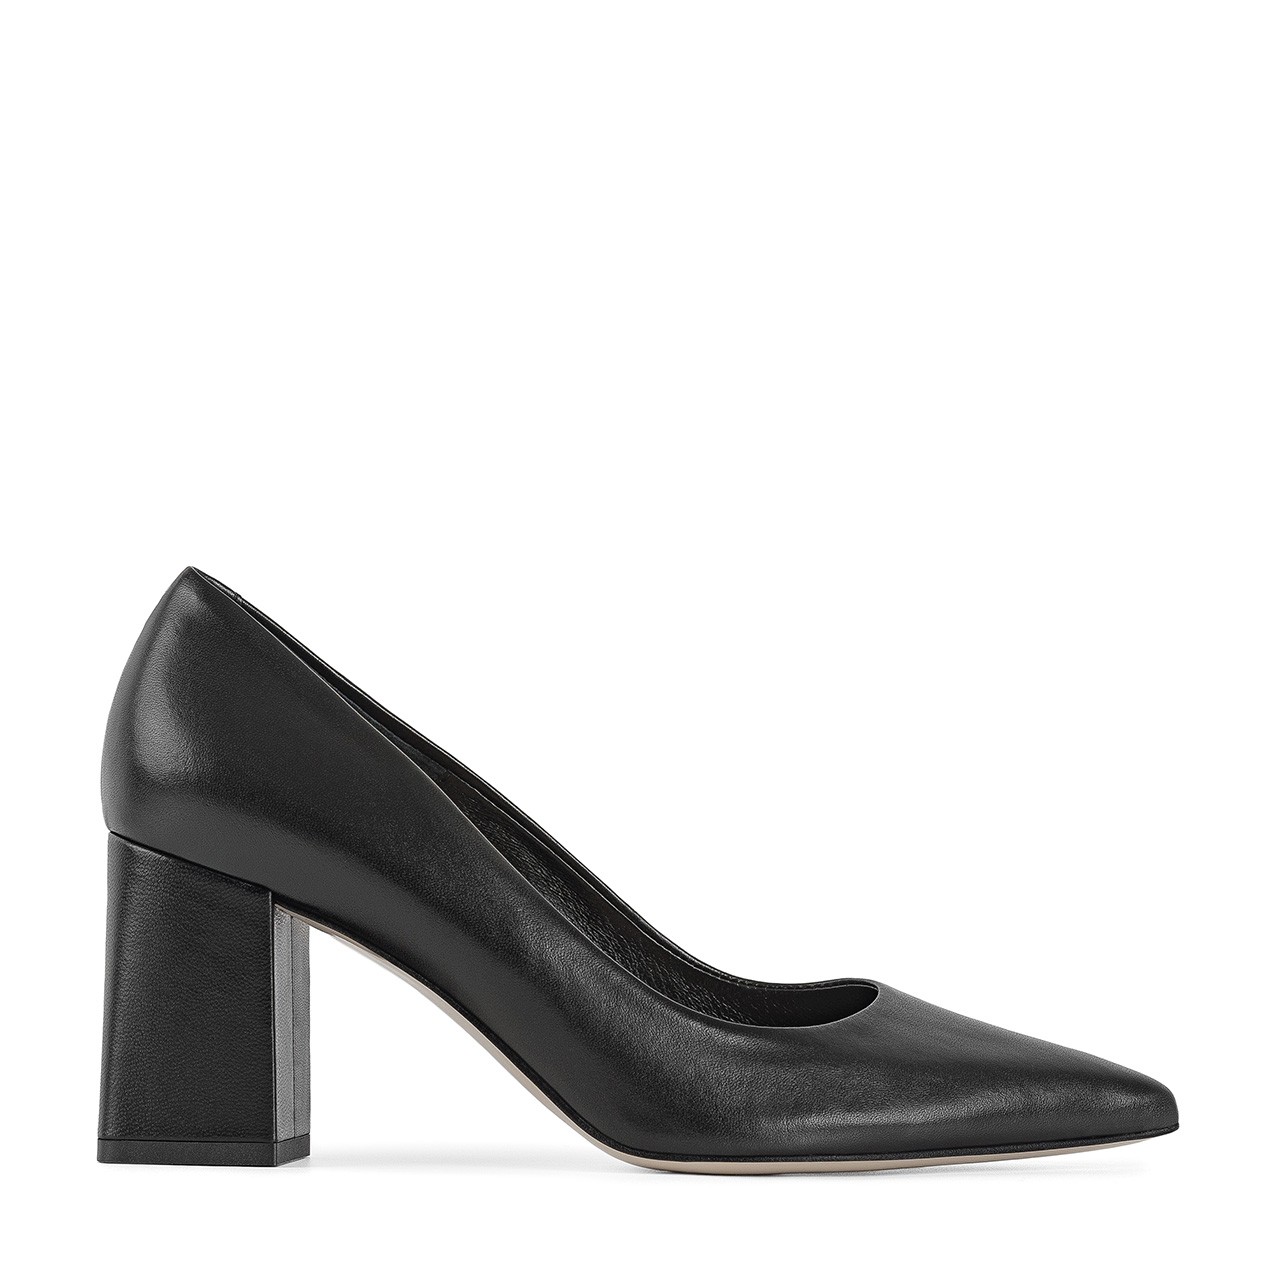 Classic black pumps made of genuine grain leather with a high block ...